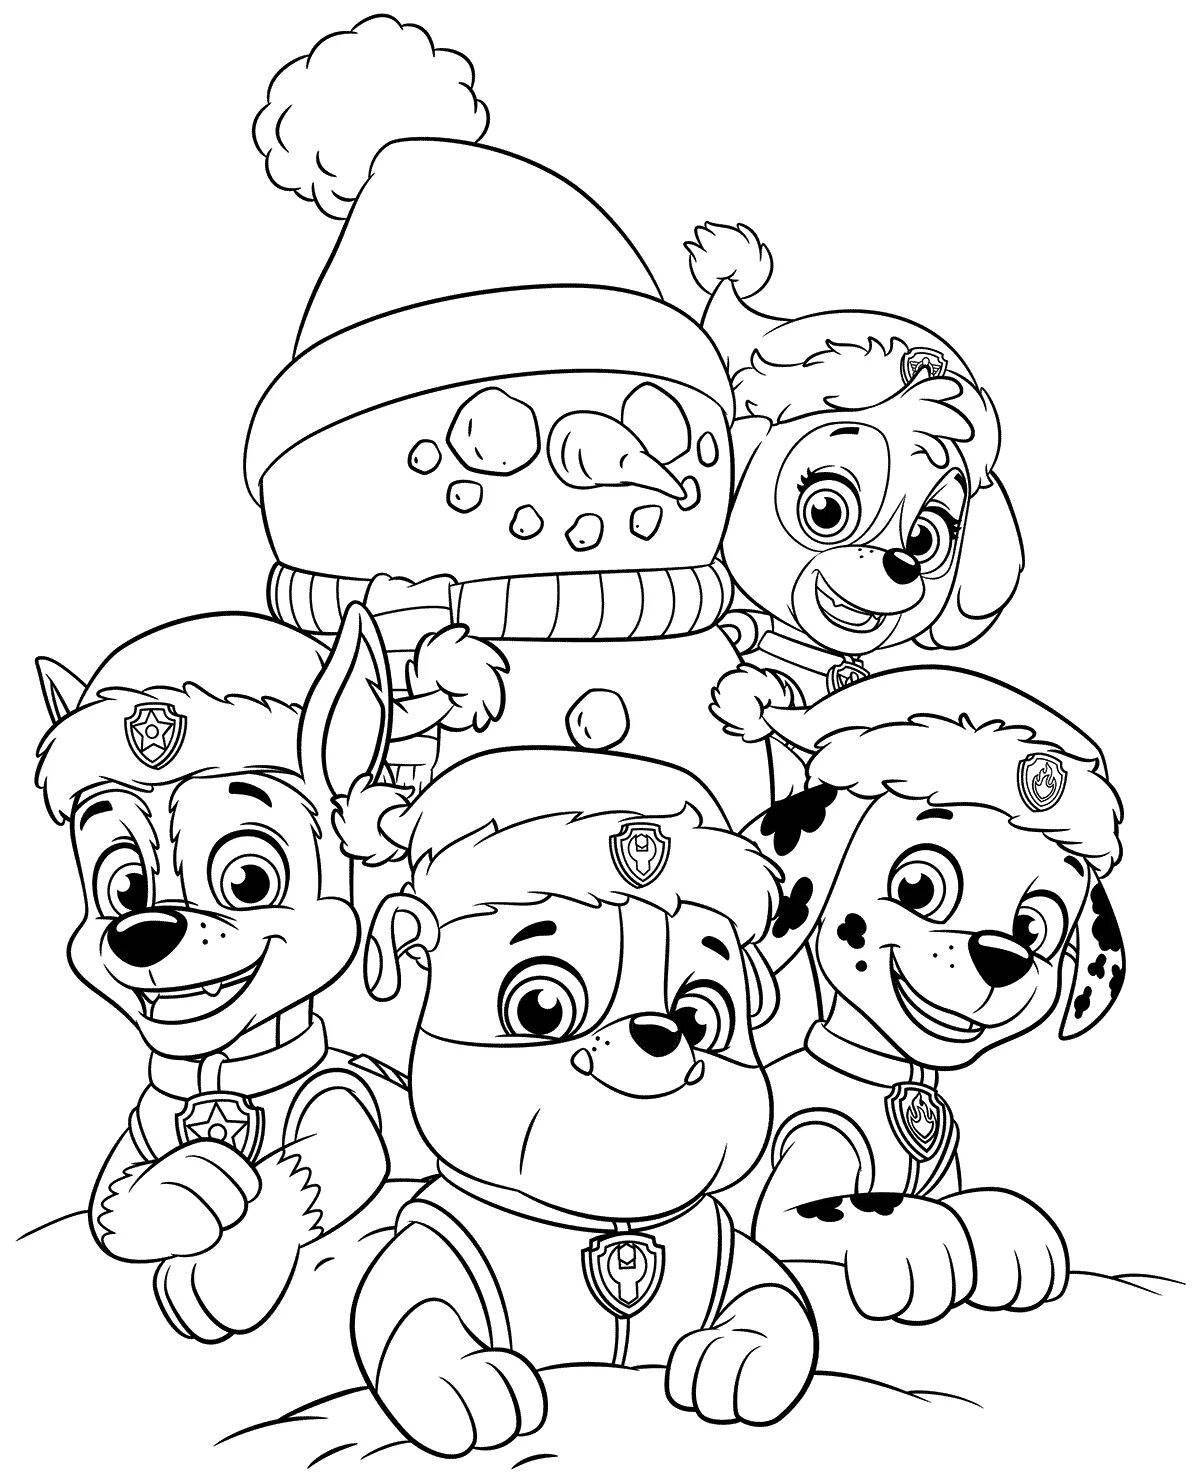 Paw patrol bold coloring all heroes